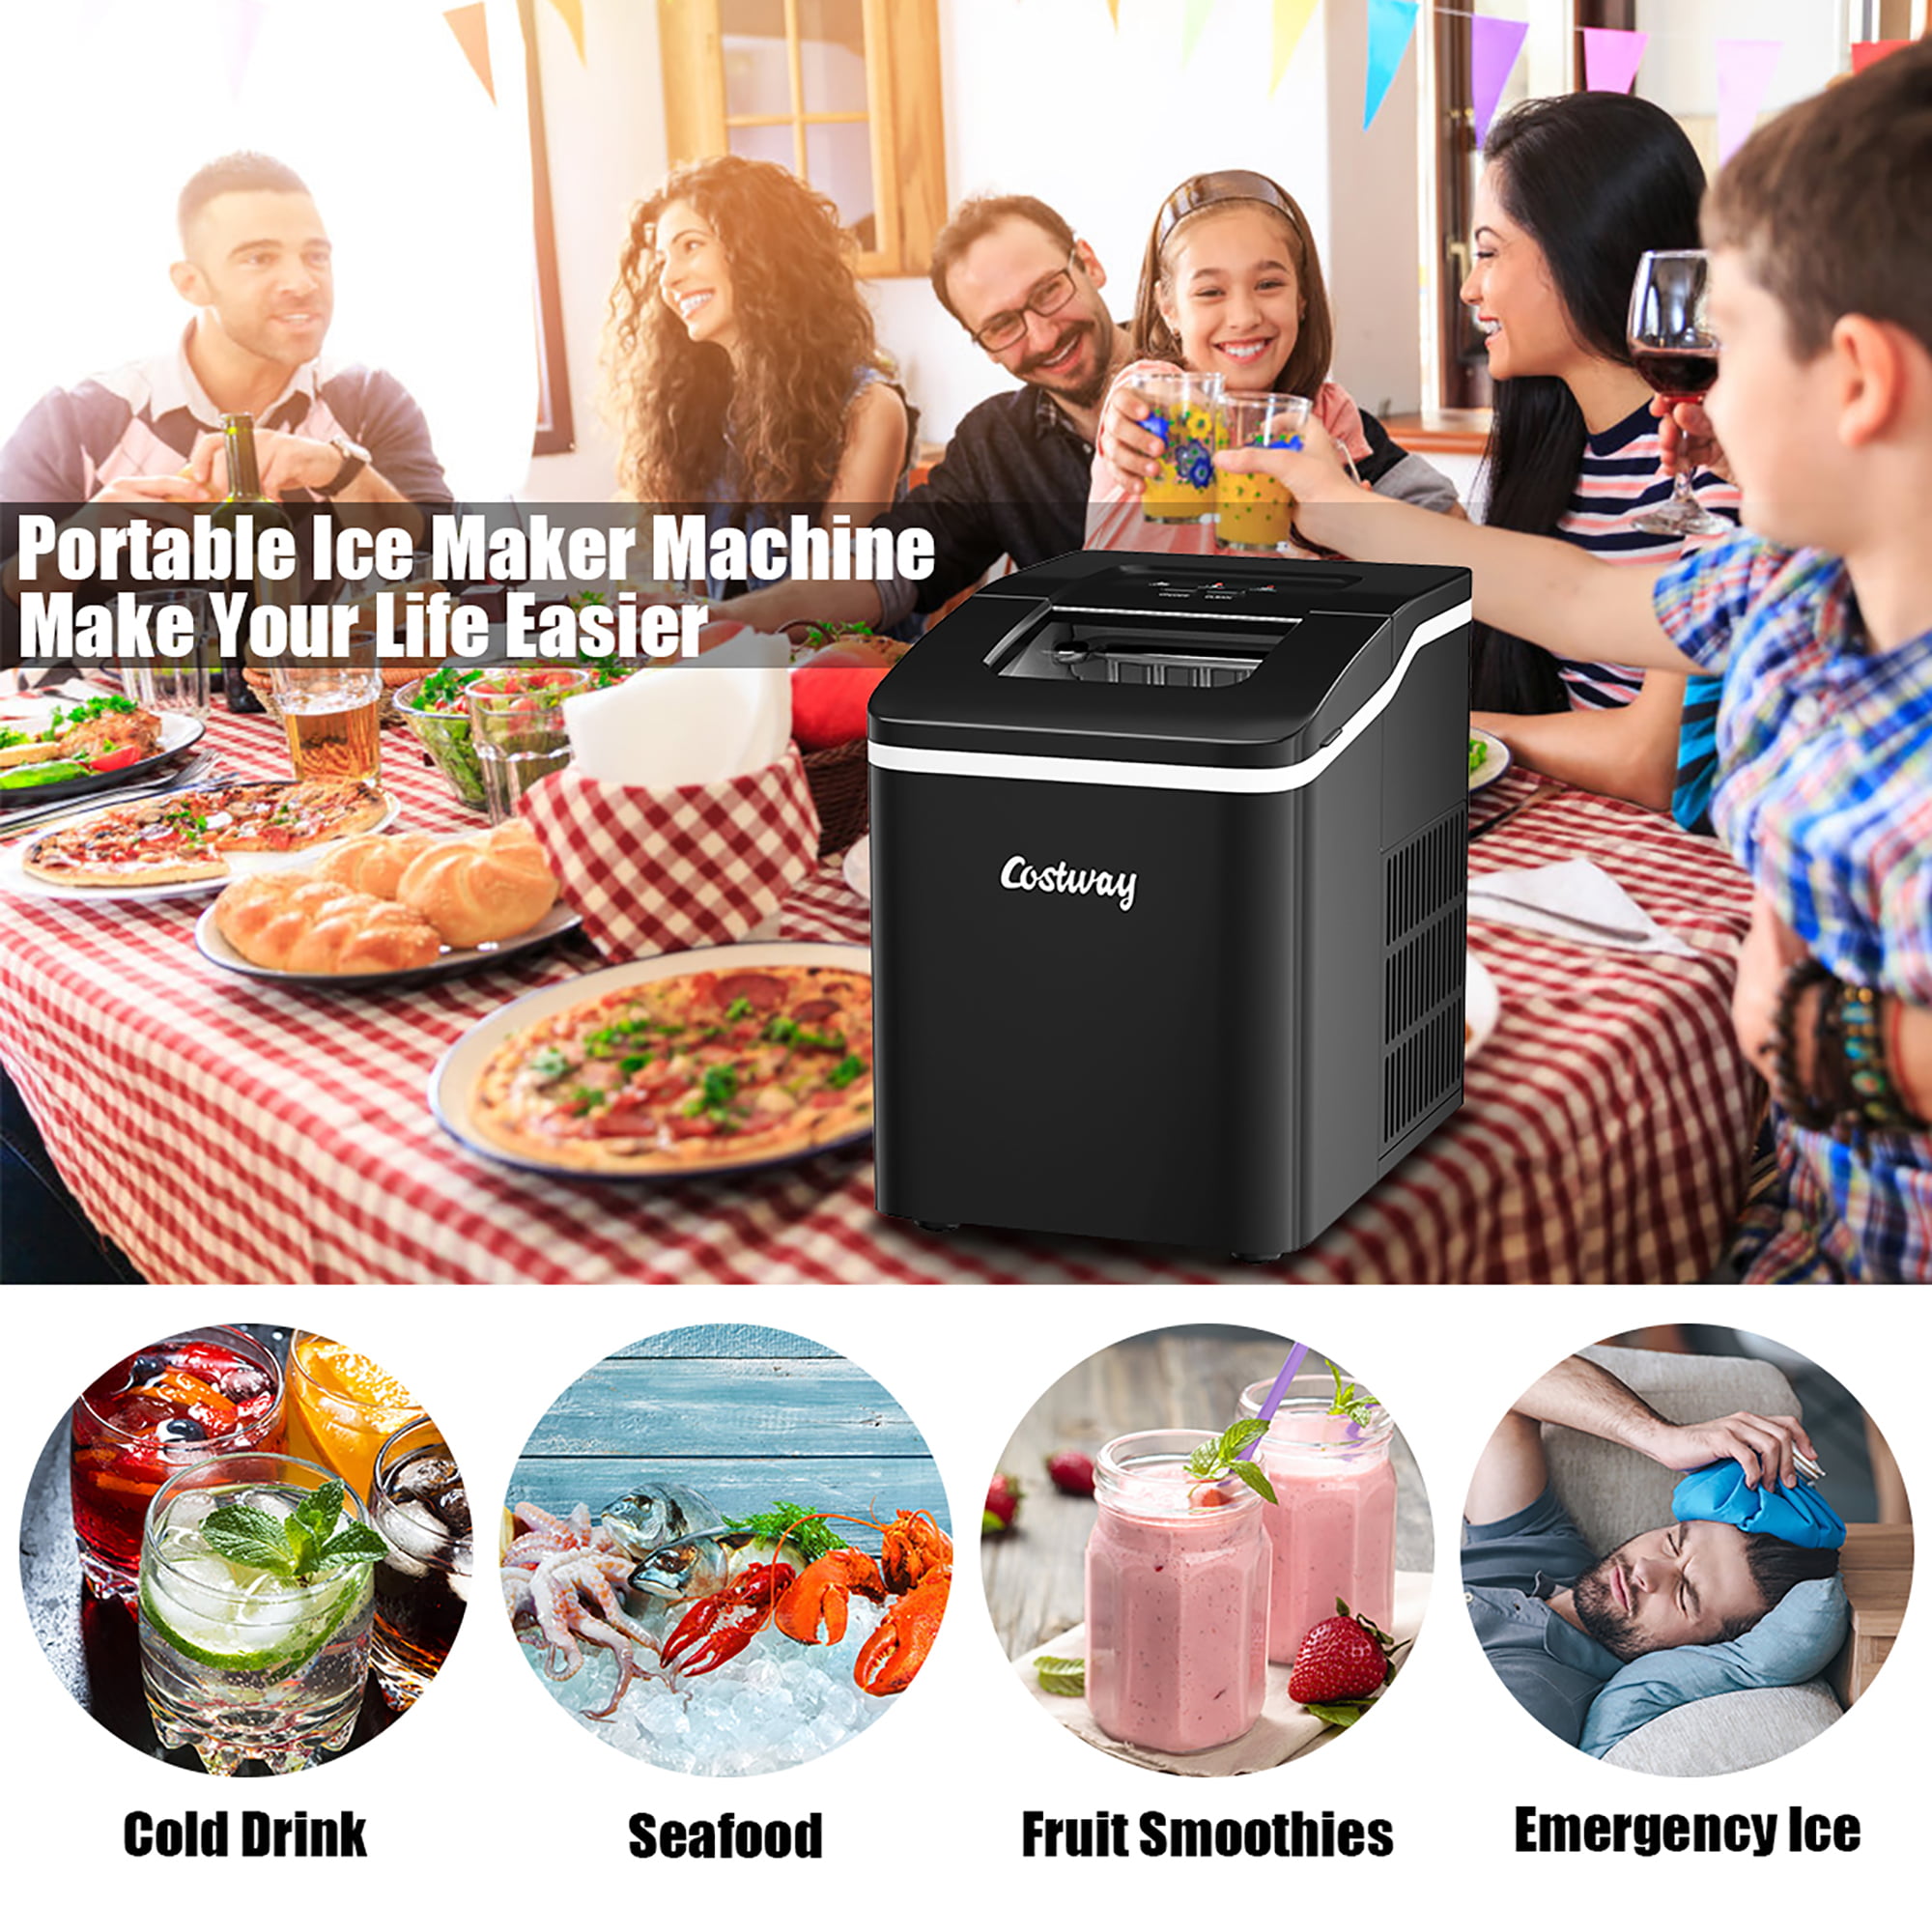 Costway Portable Ice Maker Machine Countertop 26Lbs/24H Self-cleaning w/ Scoop Black - image 5 of 10